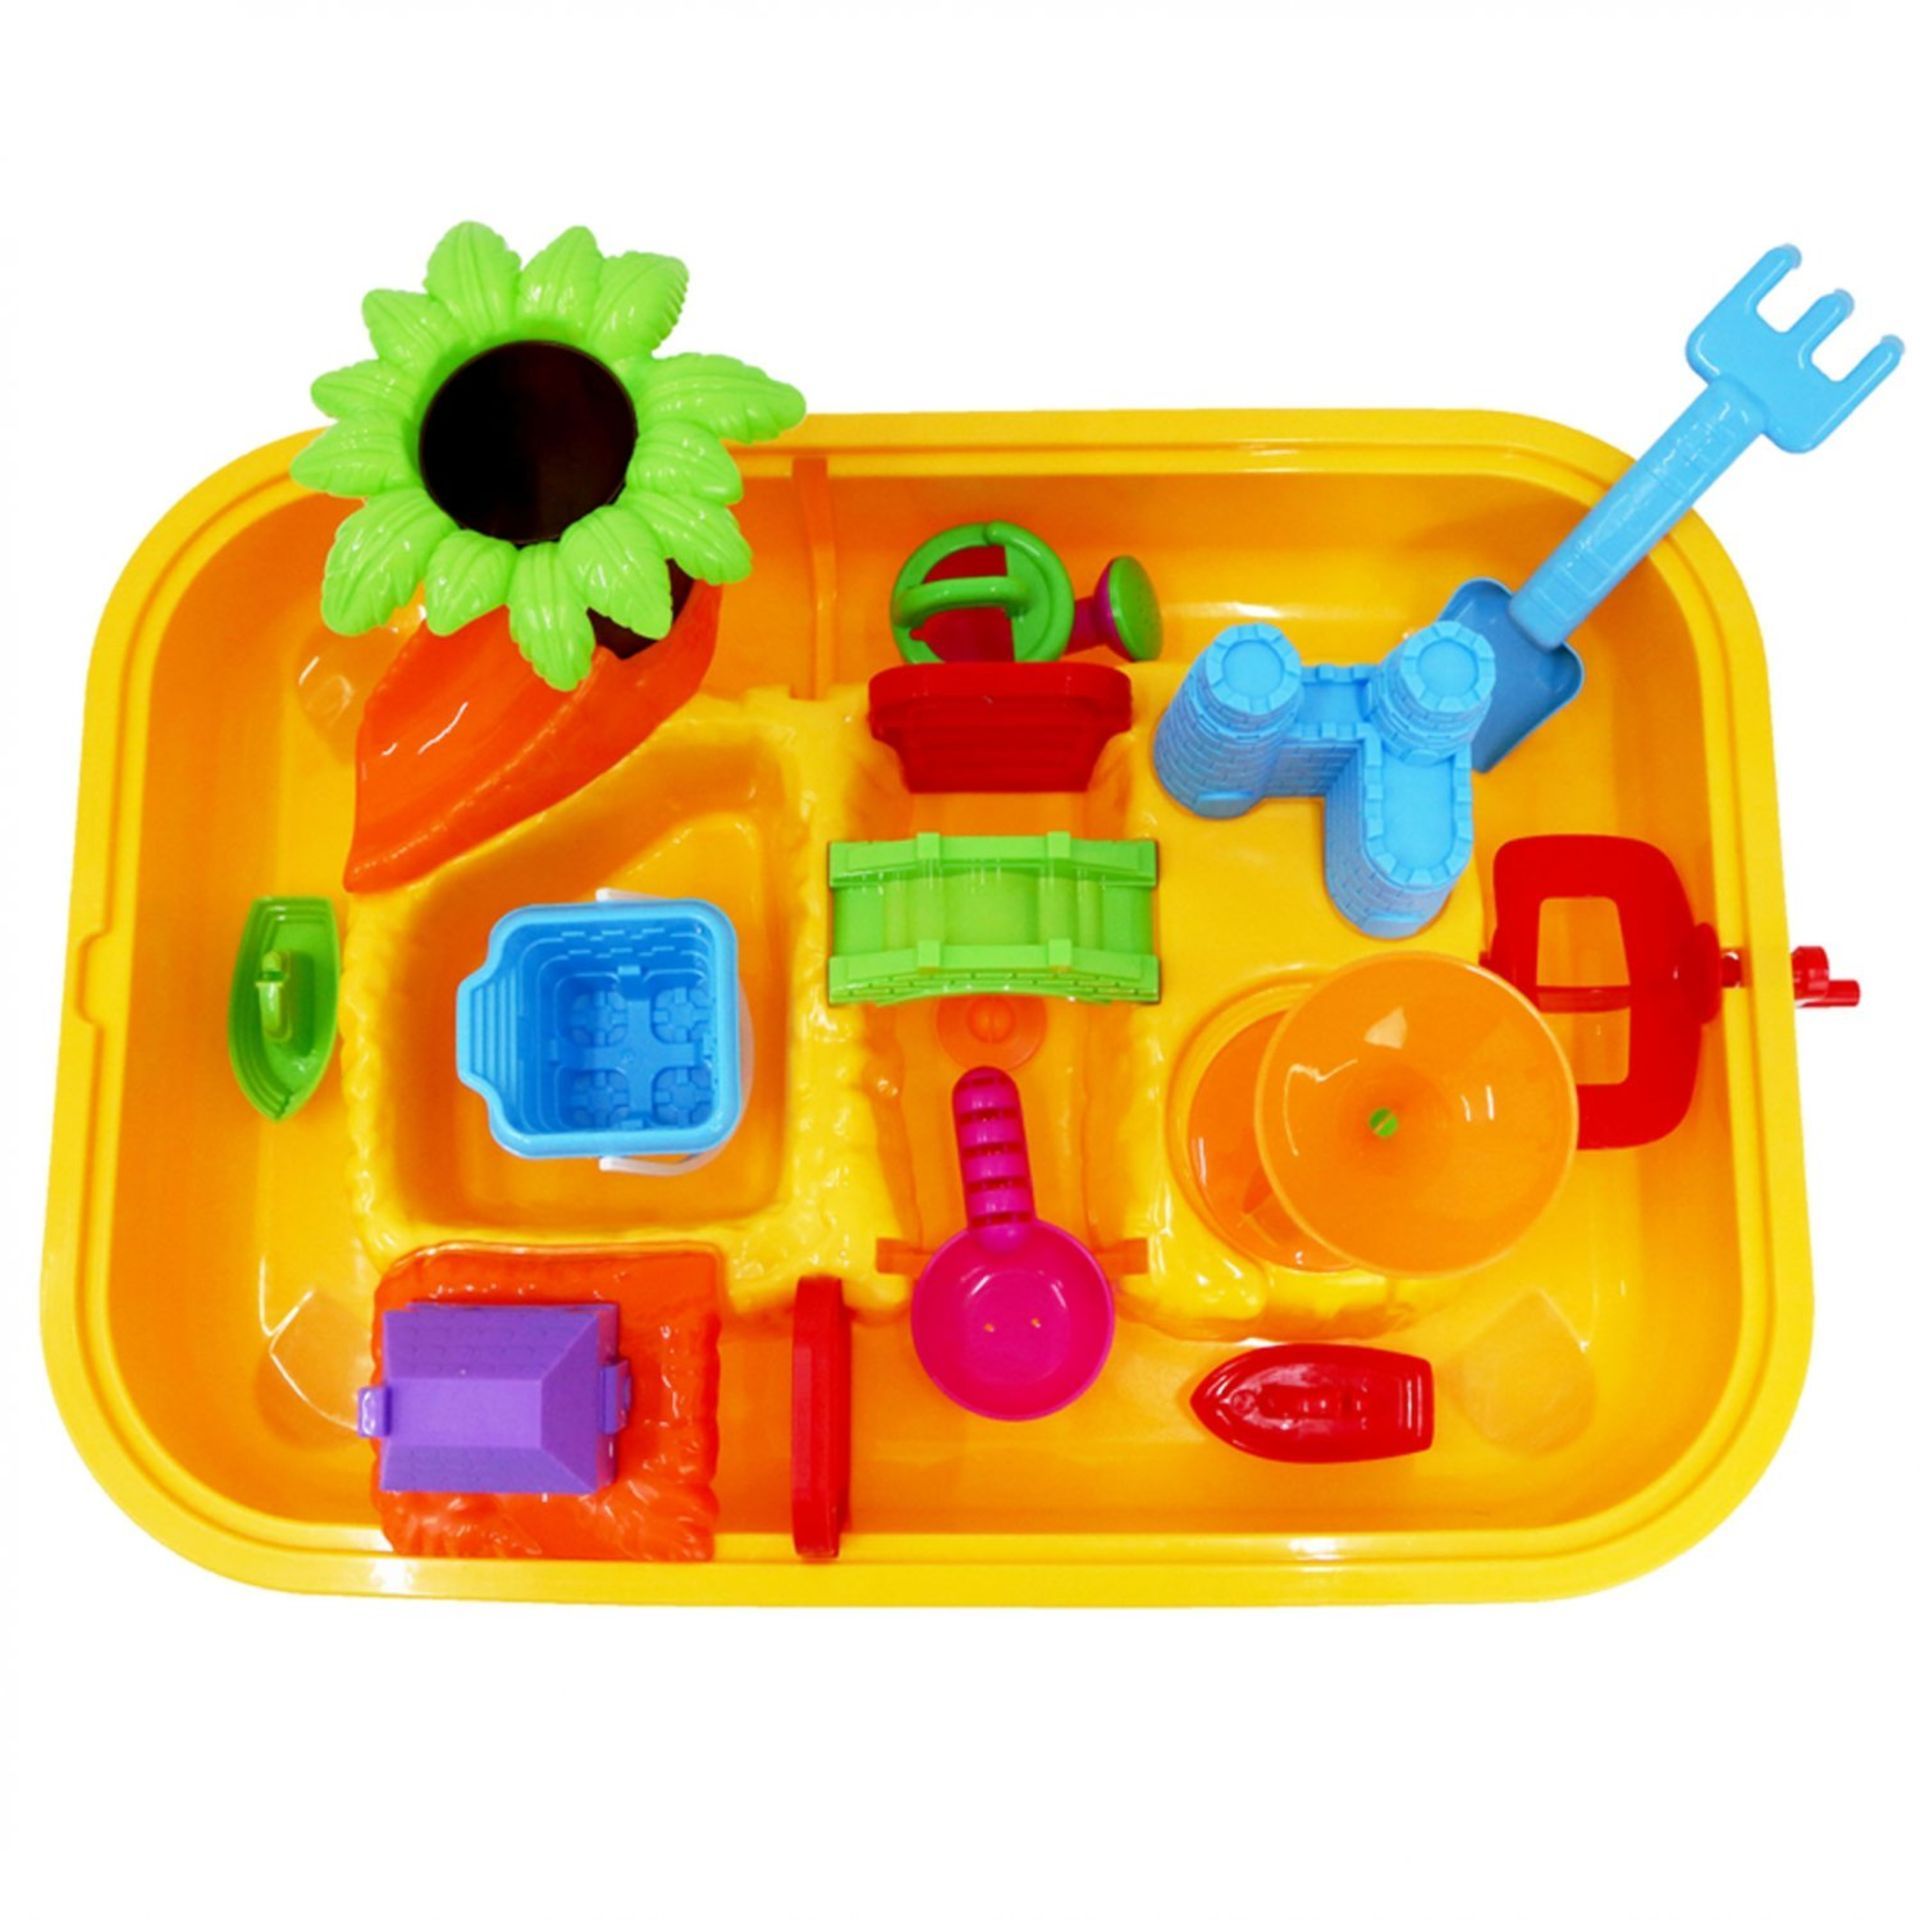 (RU92) Toddlers Kids Childrens Sand Water Table Toy With Accessories Bring the beach home with ... - Image 2 of 2